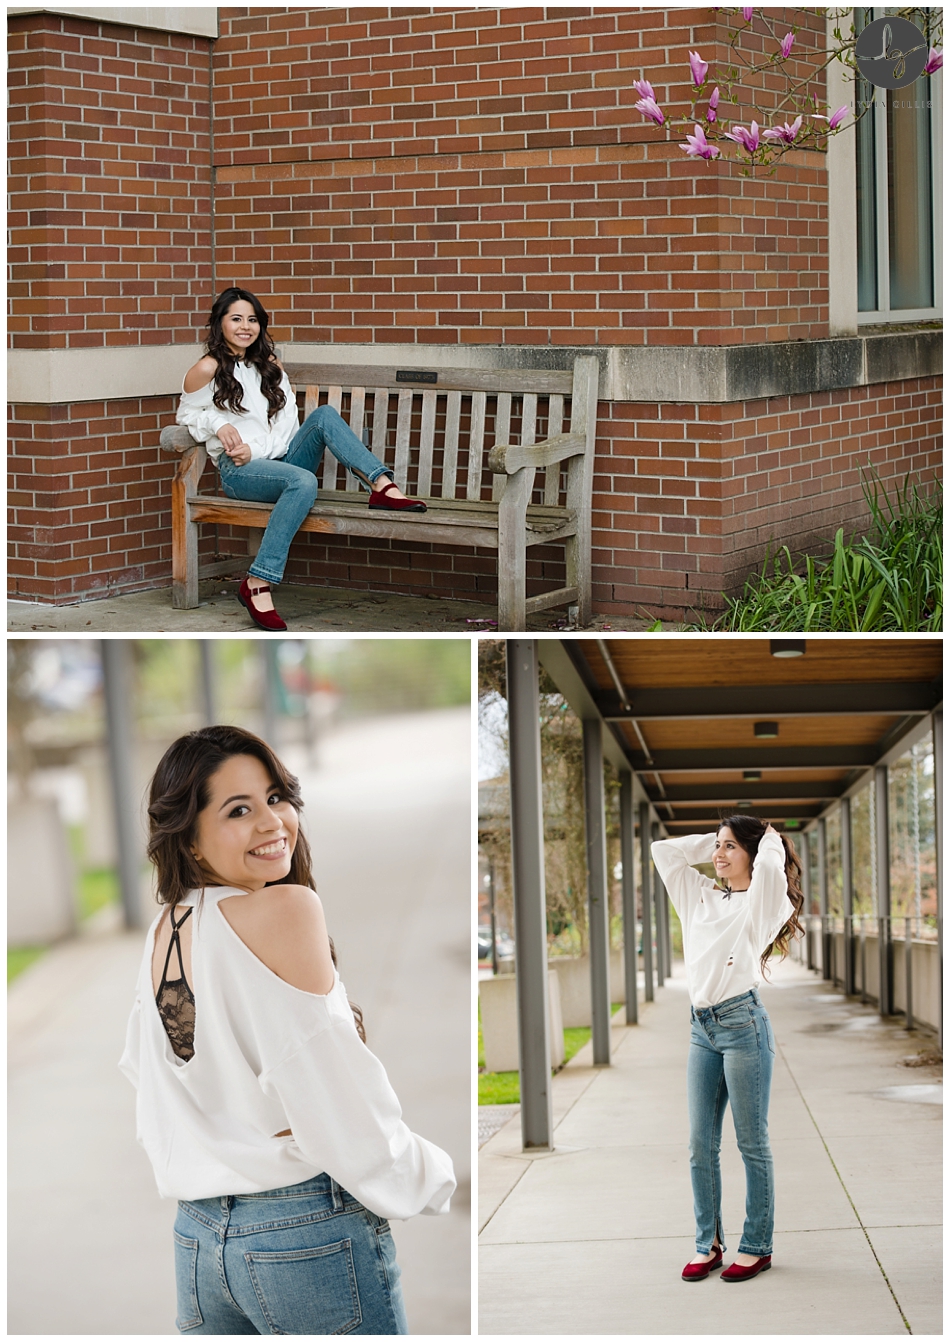 Urban model session in downtown Eugene